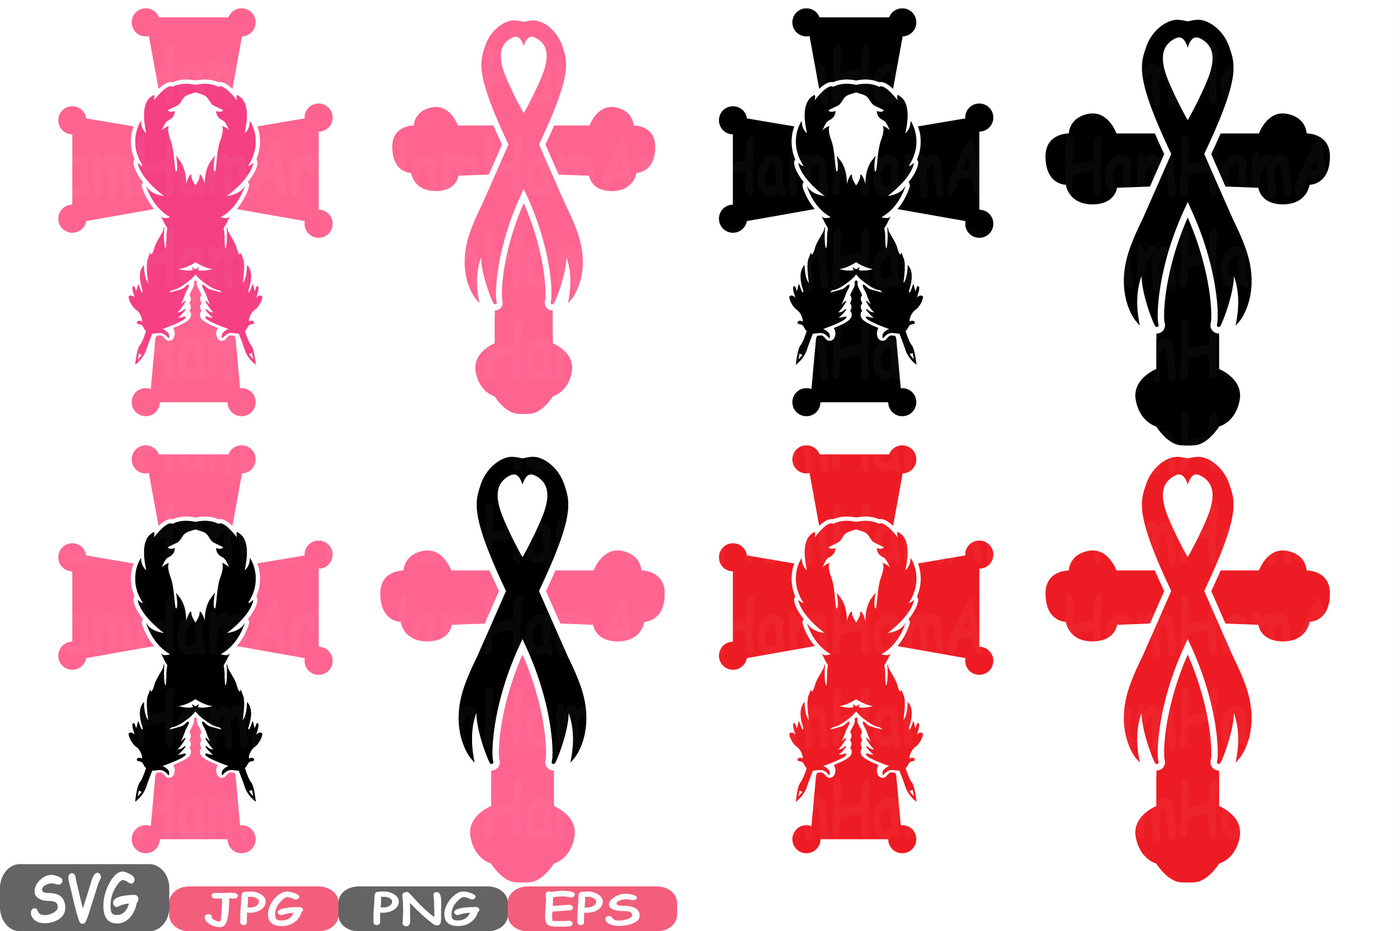 Download Cancer Ribbon Silhouette at GetDrawings.com | Free for ...